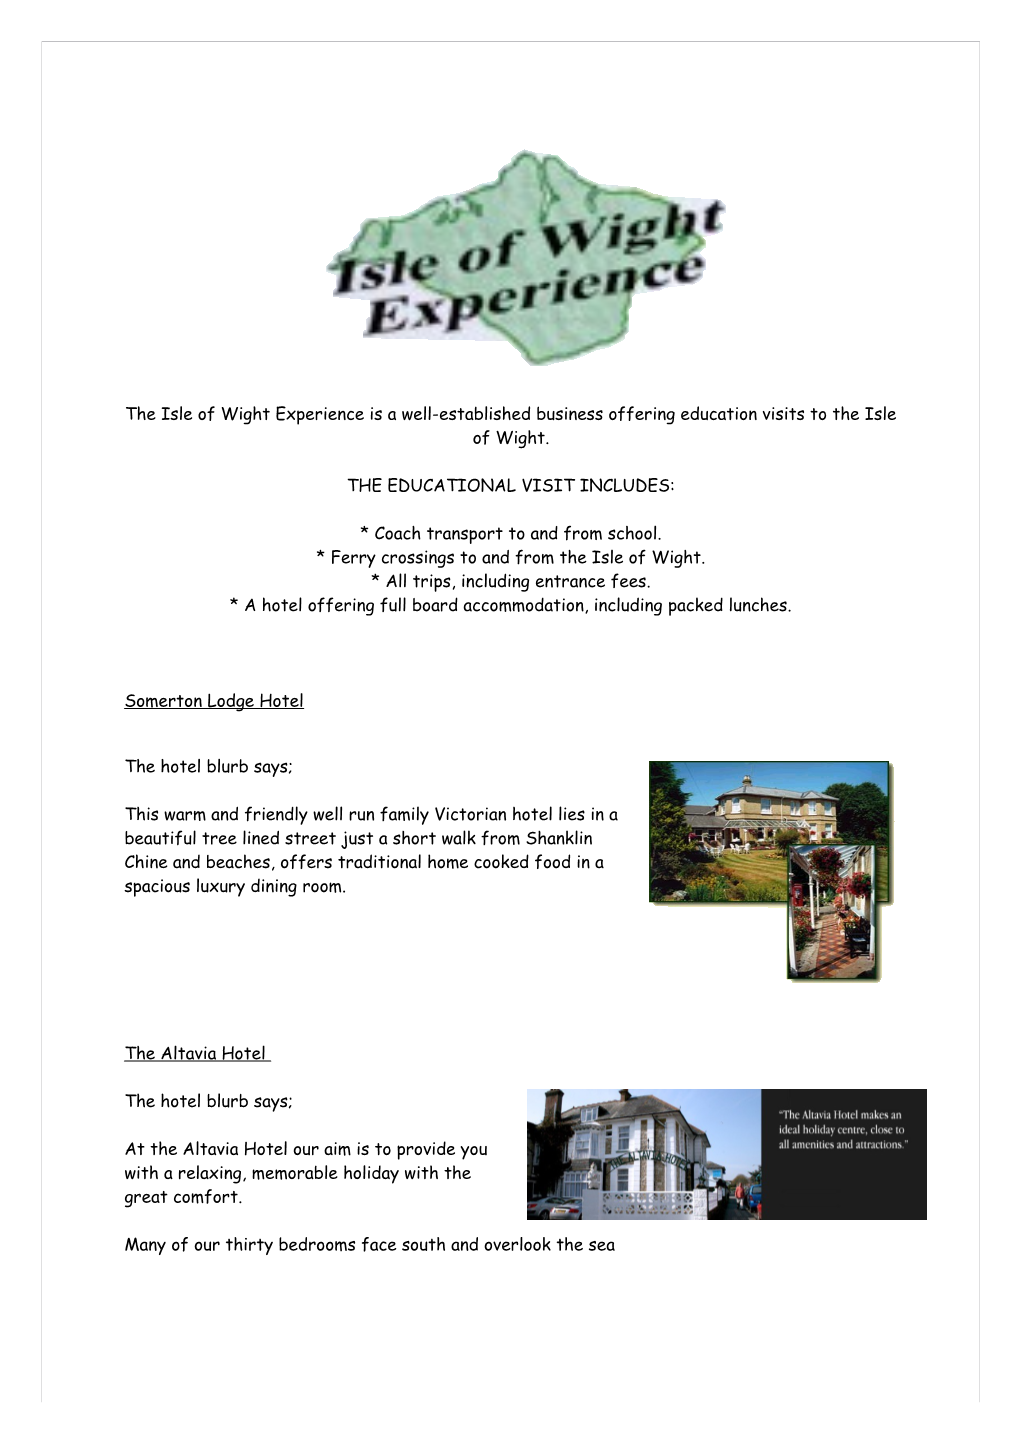 The Isle of Wight Experience Is a Well-Established Business Offering Education Visits